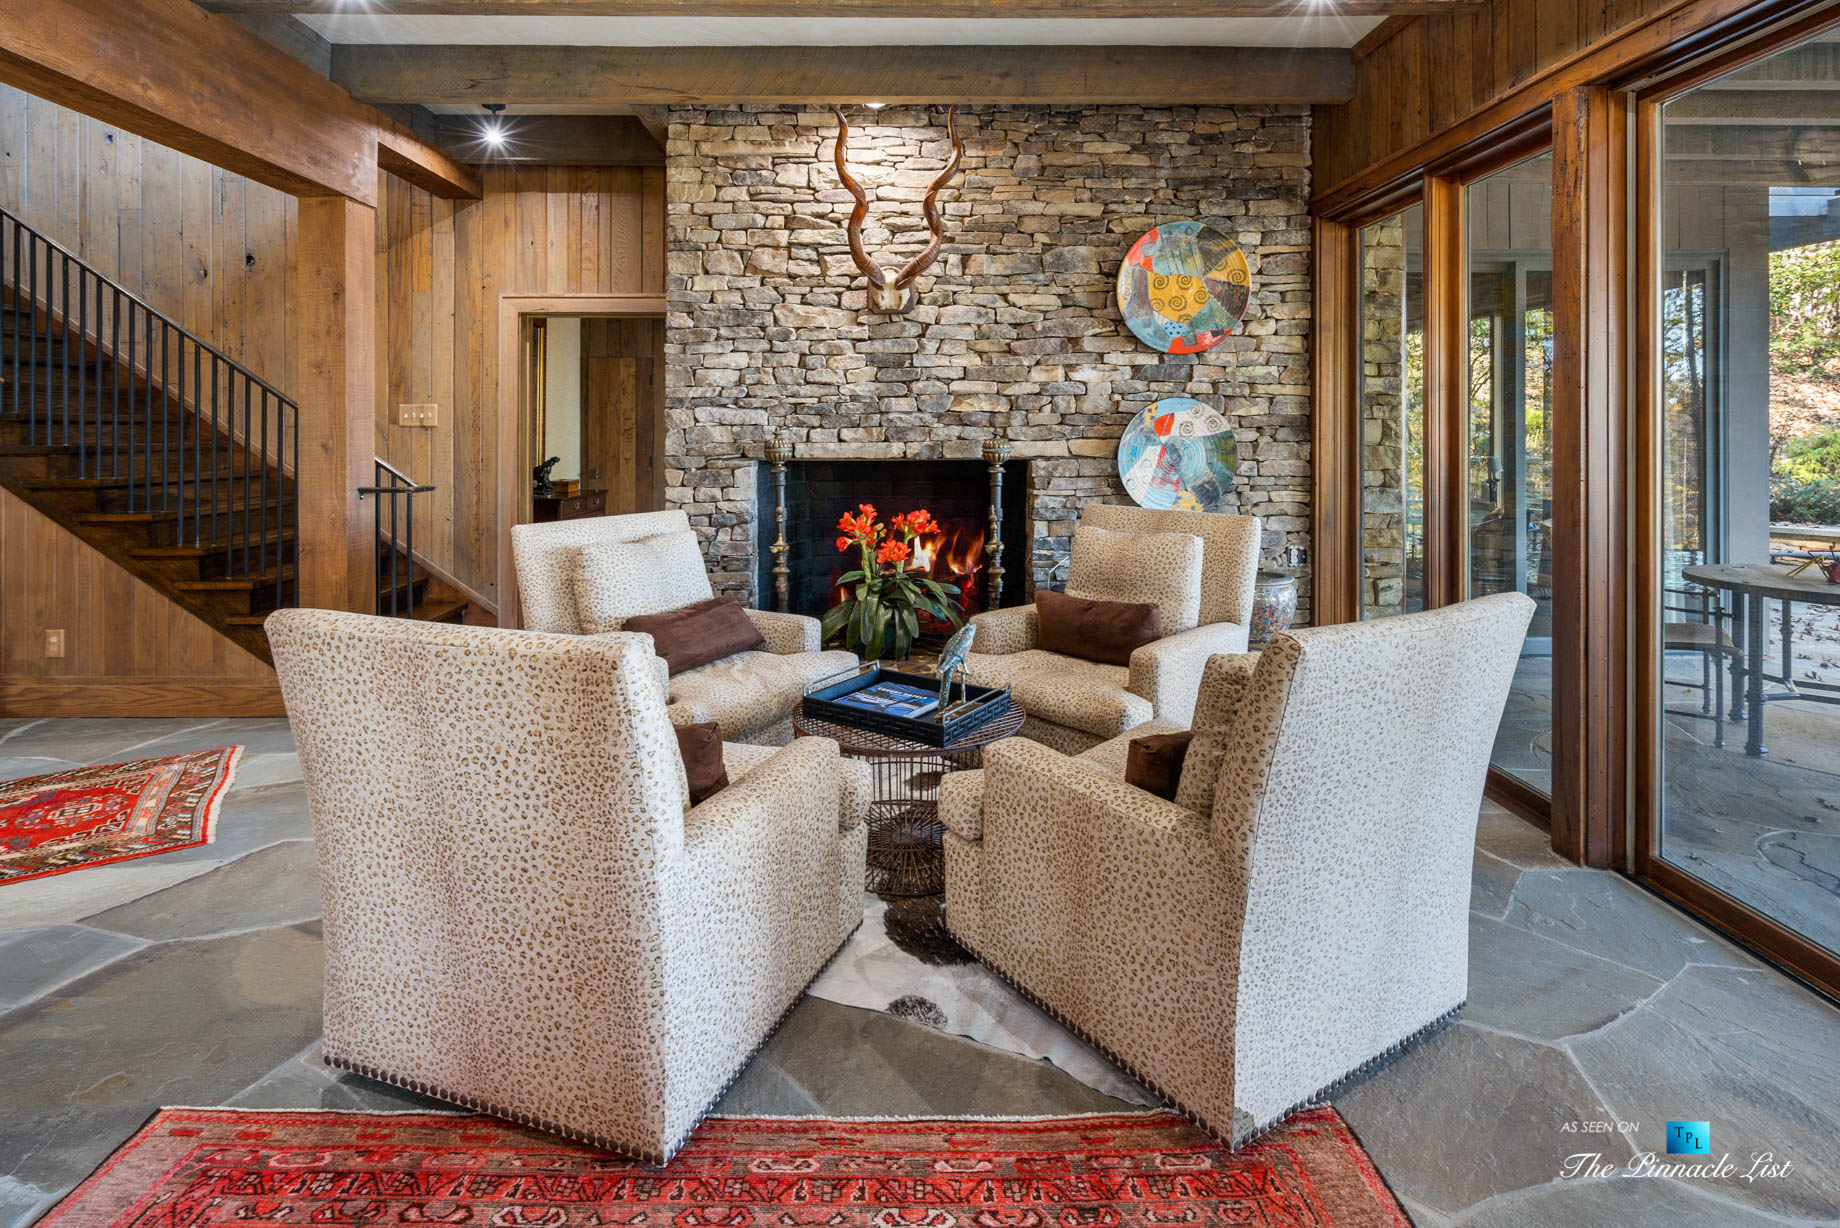 7860 Chestnut Hill Rd, Cumming, GA, USA - Sitting Area and Fireplace - Luxury Real Estate - Lake Lanier Mid-Century Modern Stone Home